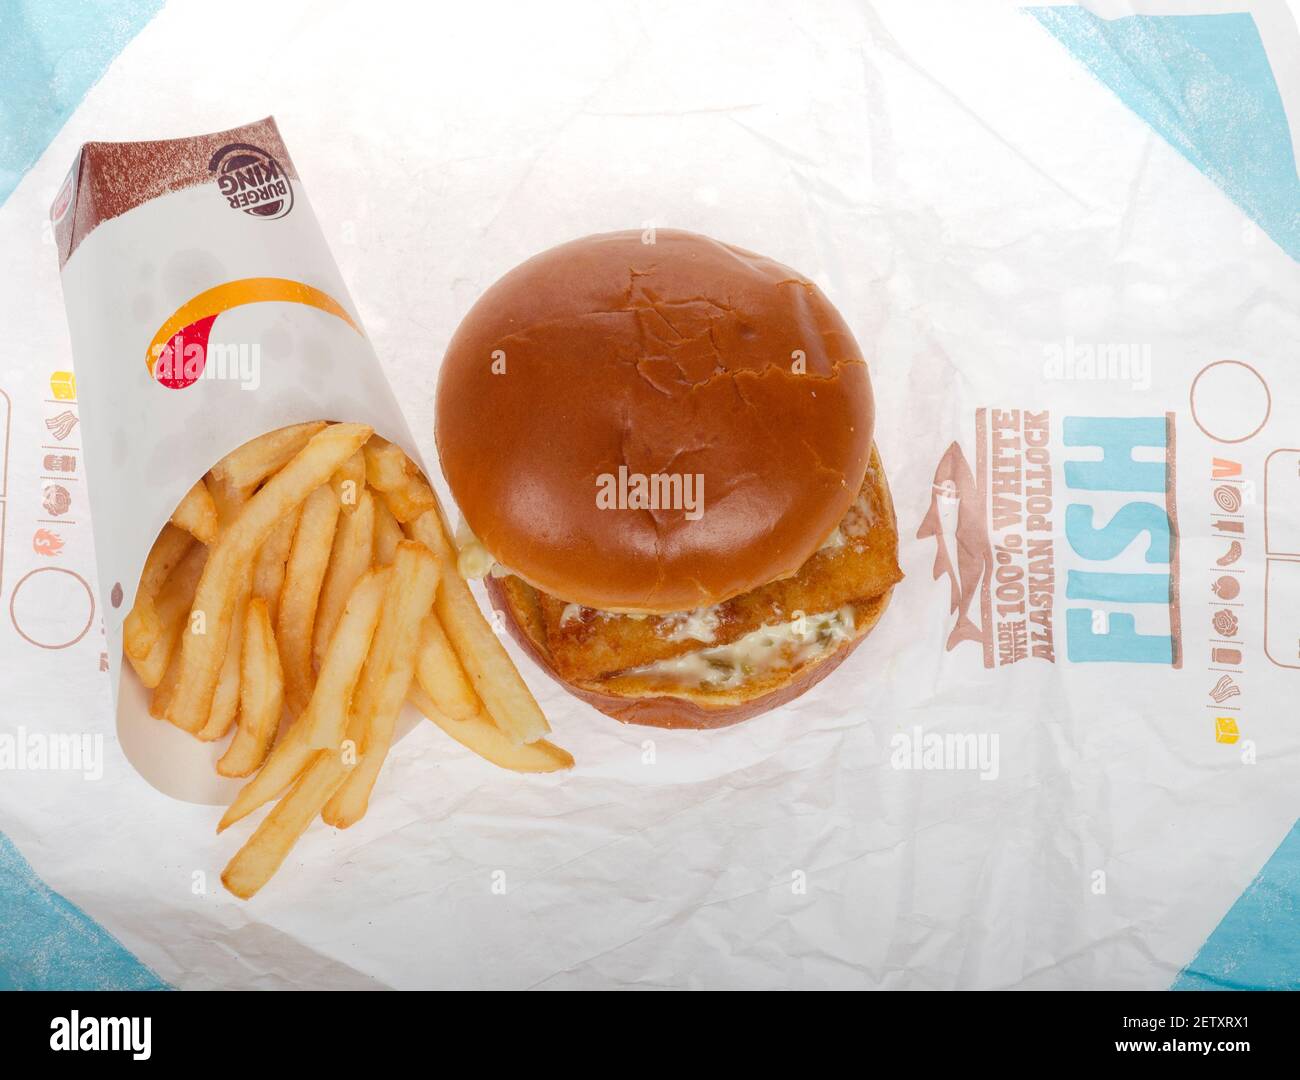 Burger King Big Fish Sandwich with large french fries Stock Photo